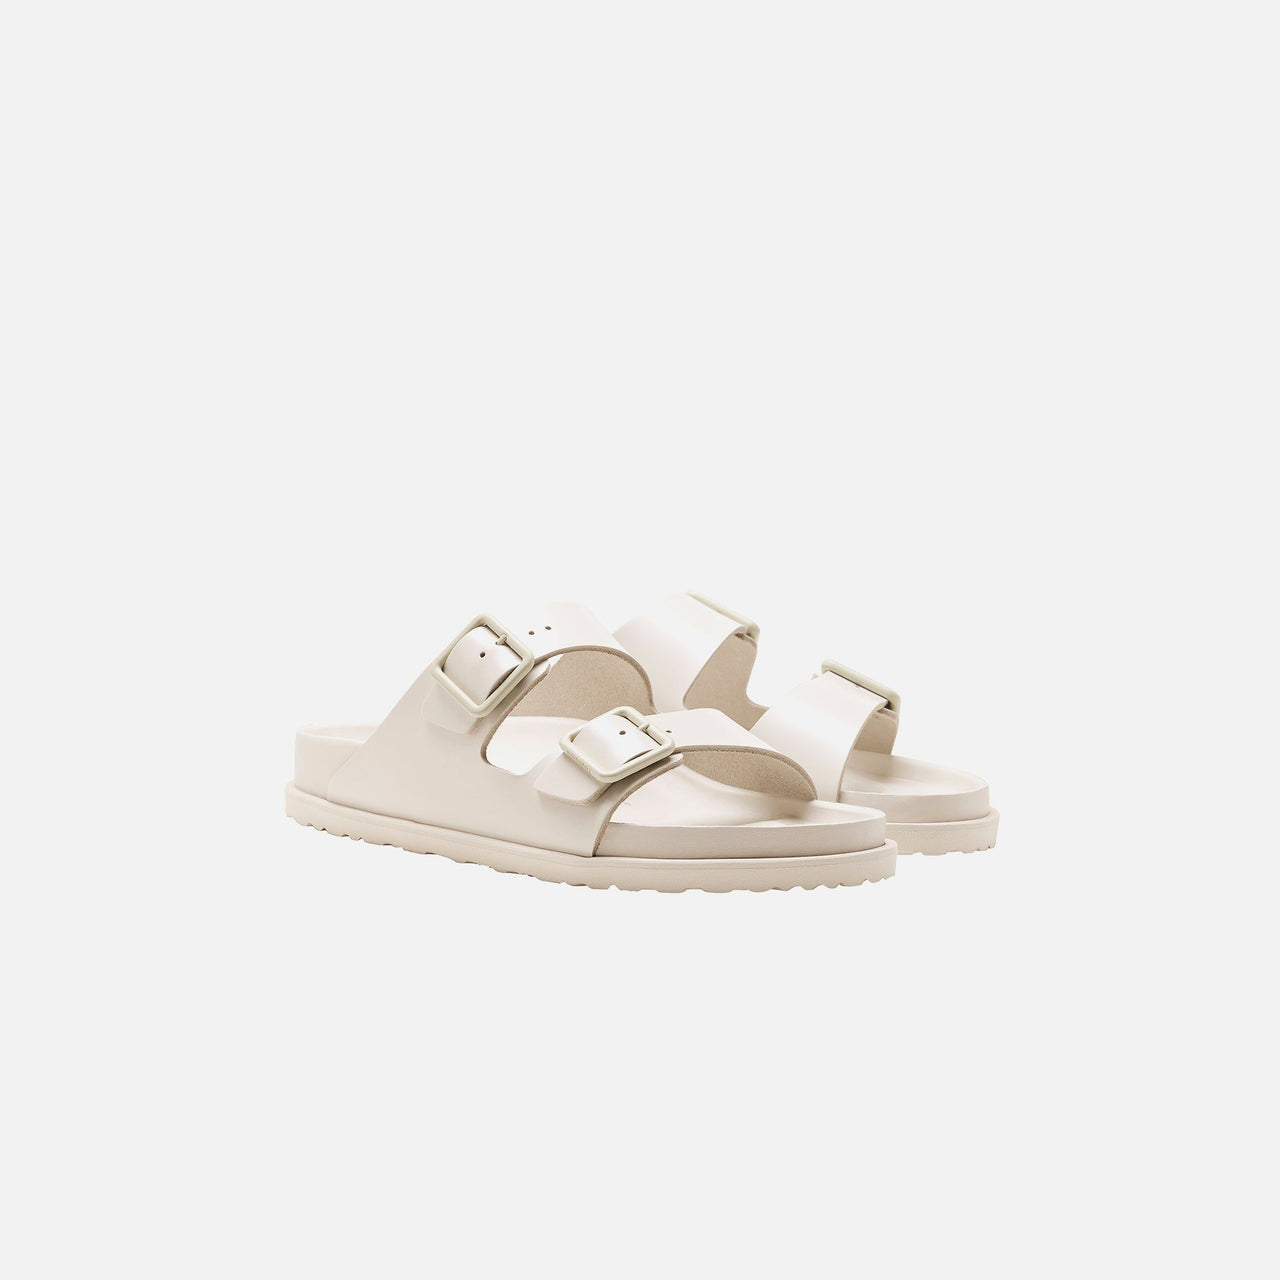  High-Quality Birkenstock 1774 Arizona Smooth Leather Bone Sandals - Perfect for Casual Wear